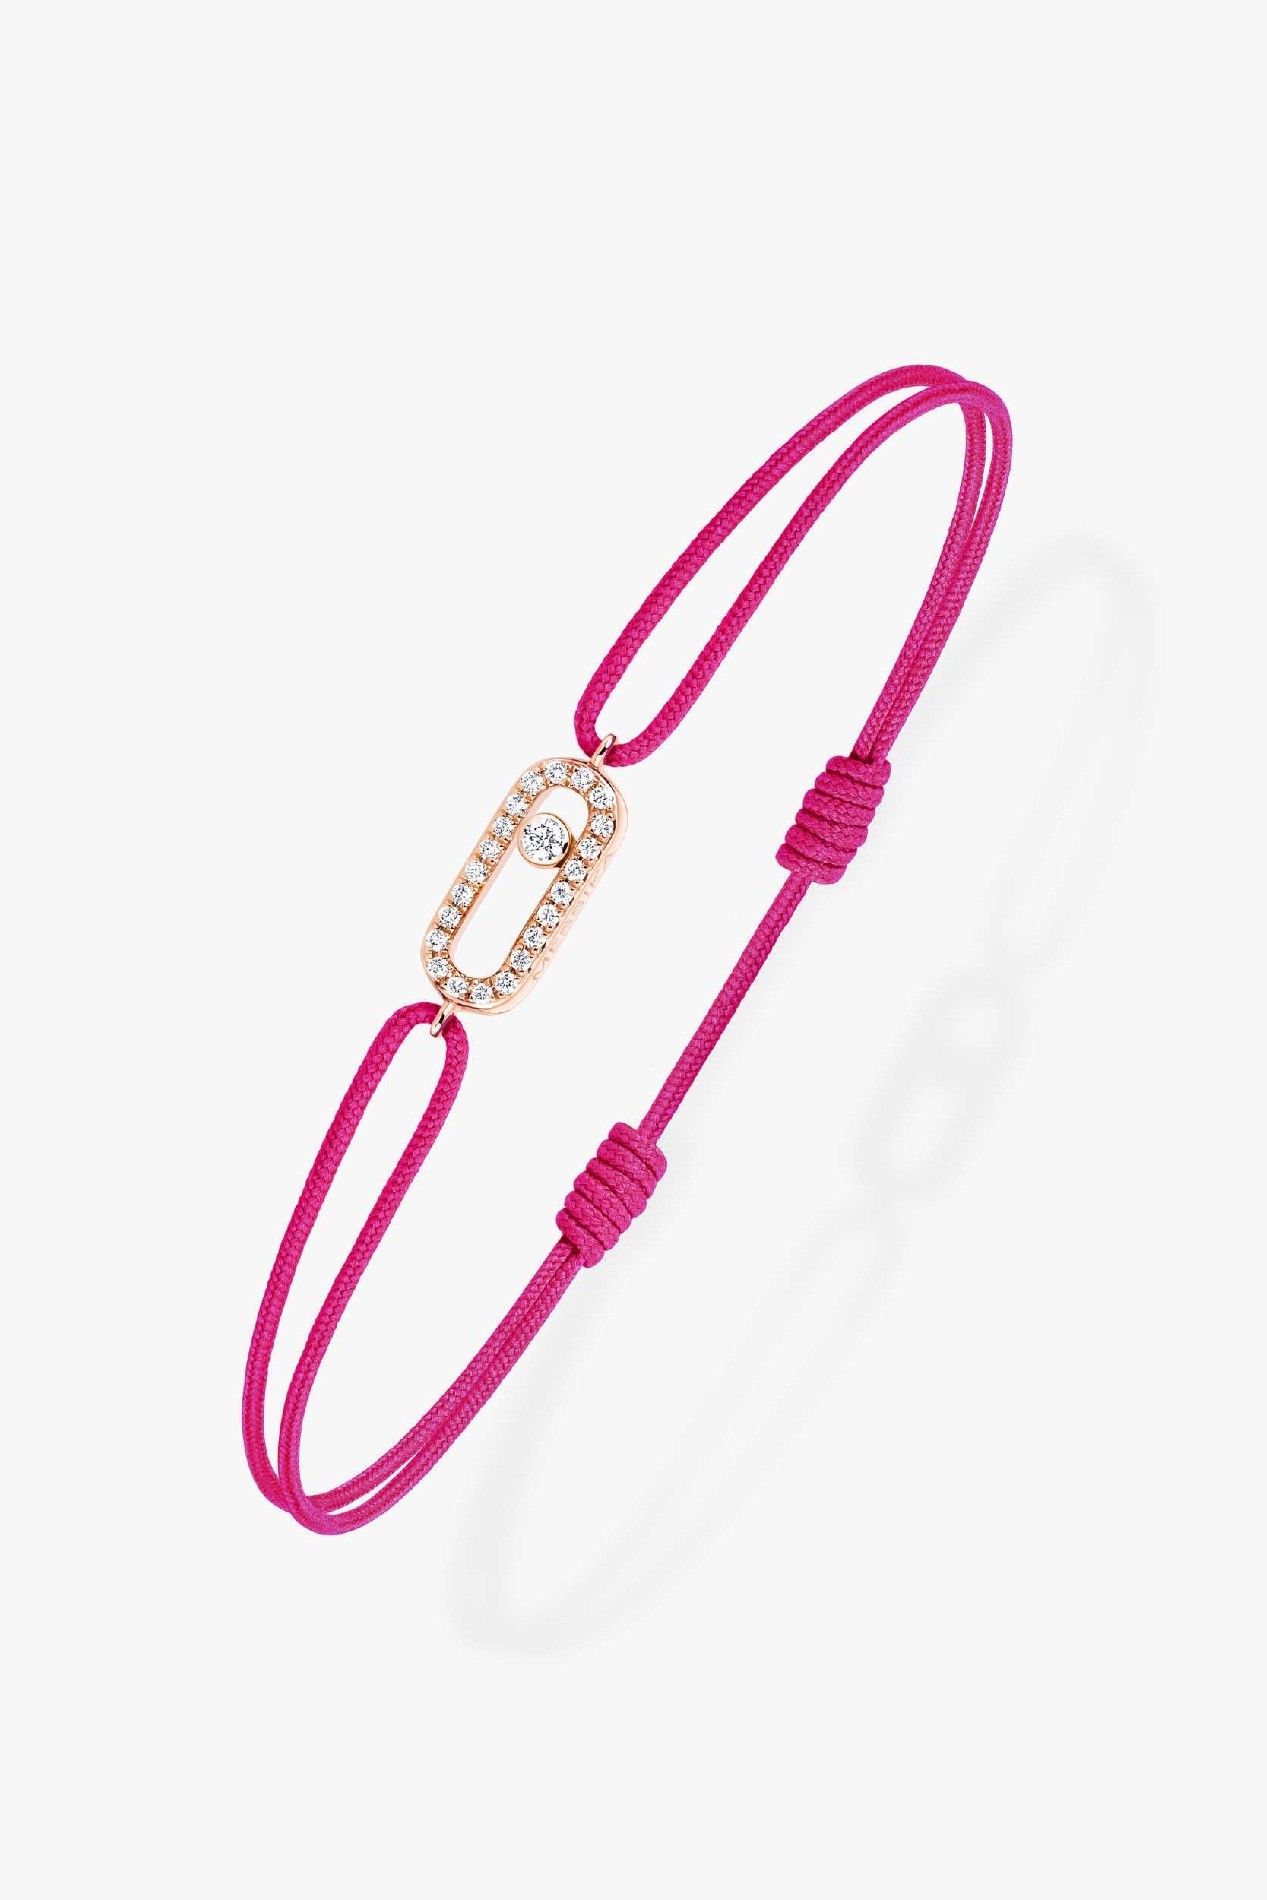 Messika - MOVE UNO PINK CORD BRACELET - Pink Cord